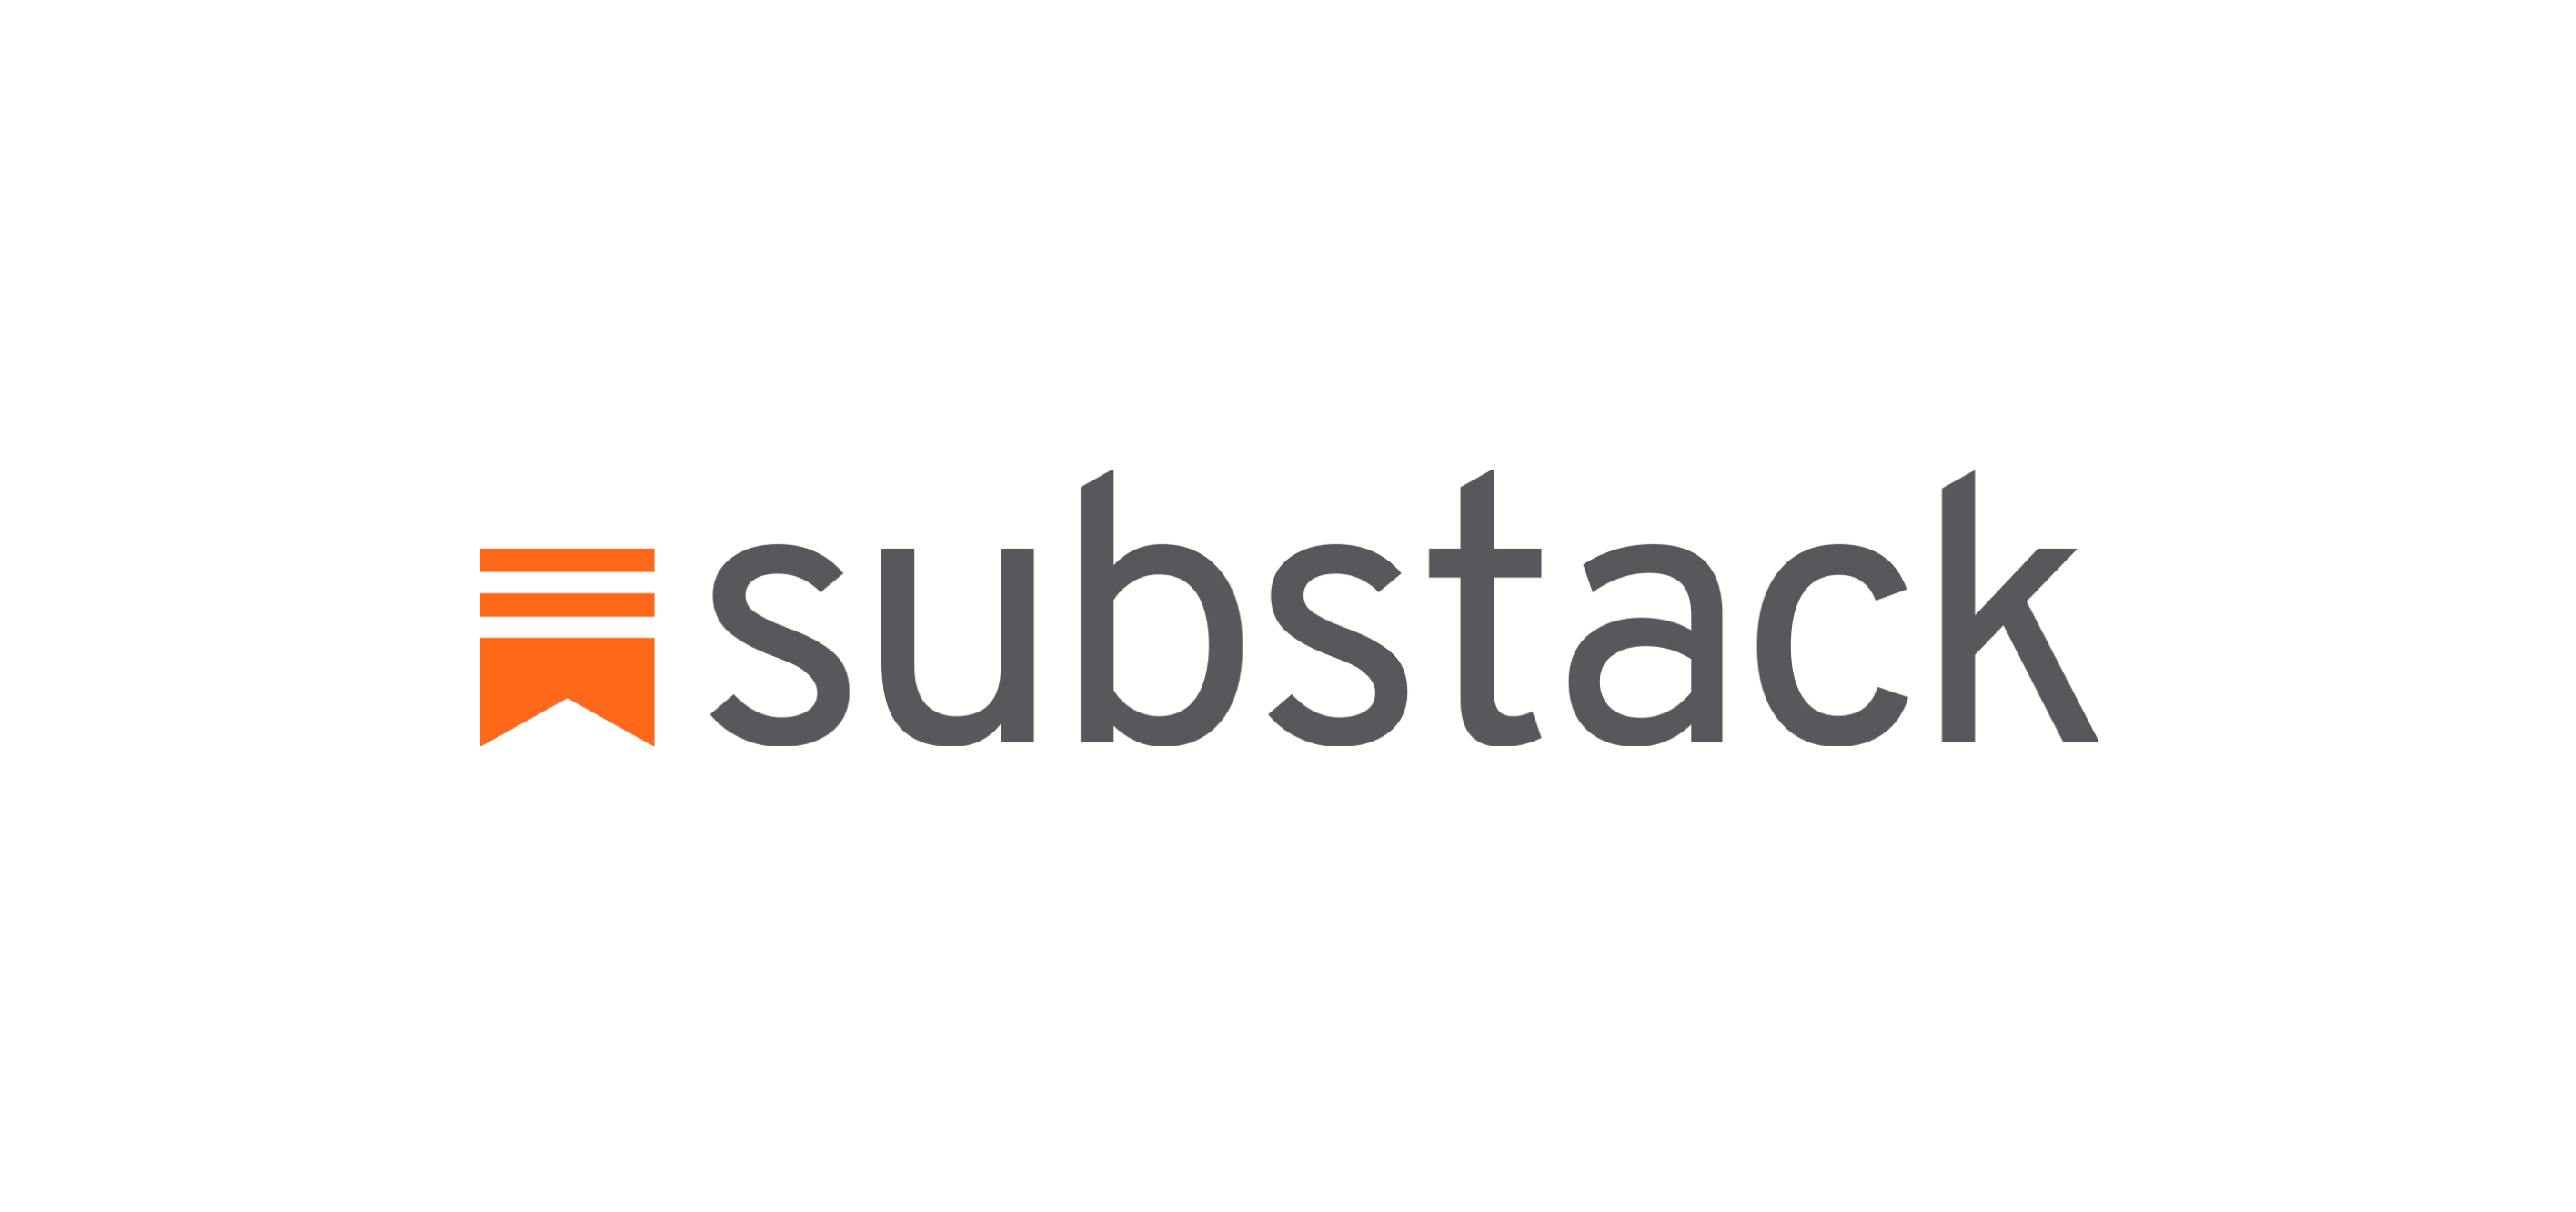 We have a real logo now - On Substack